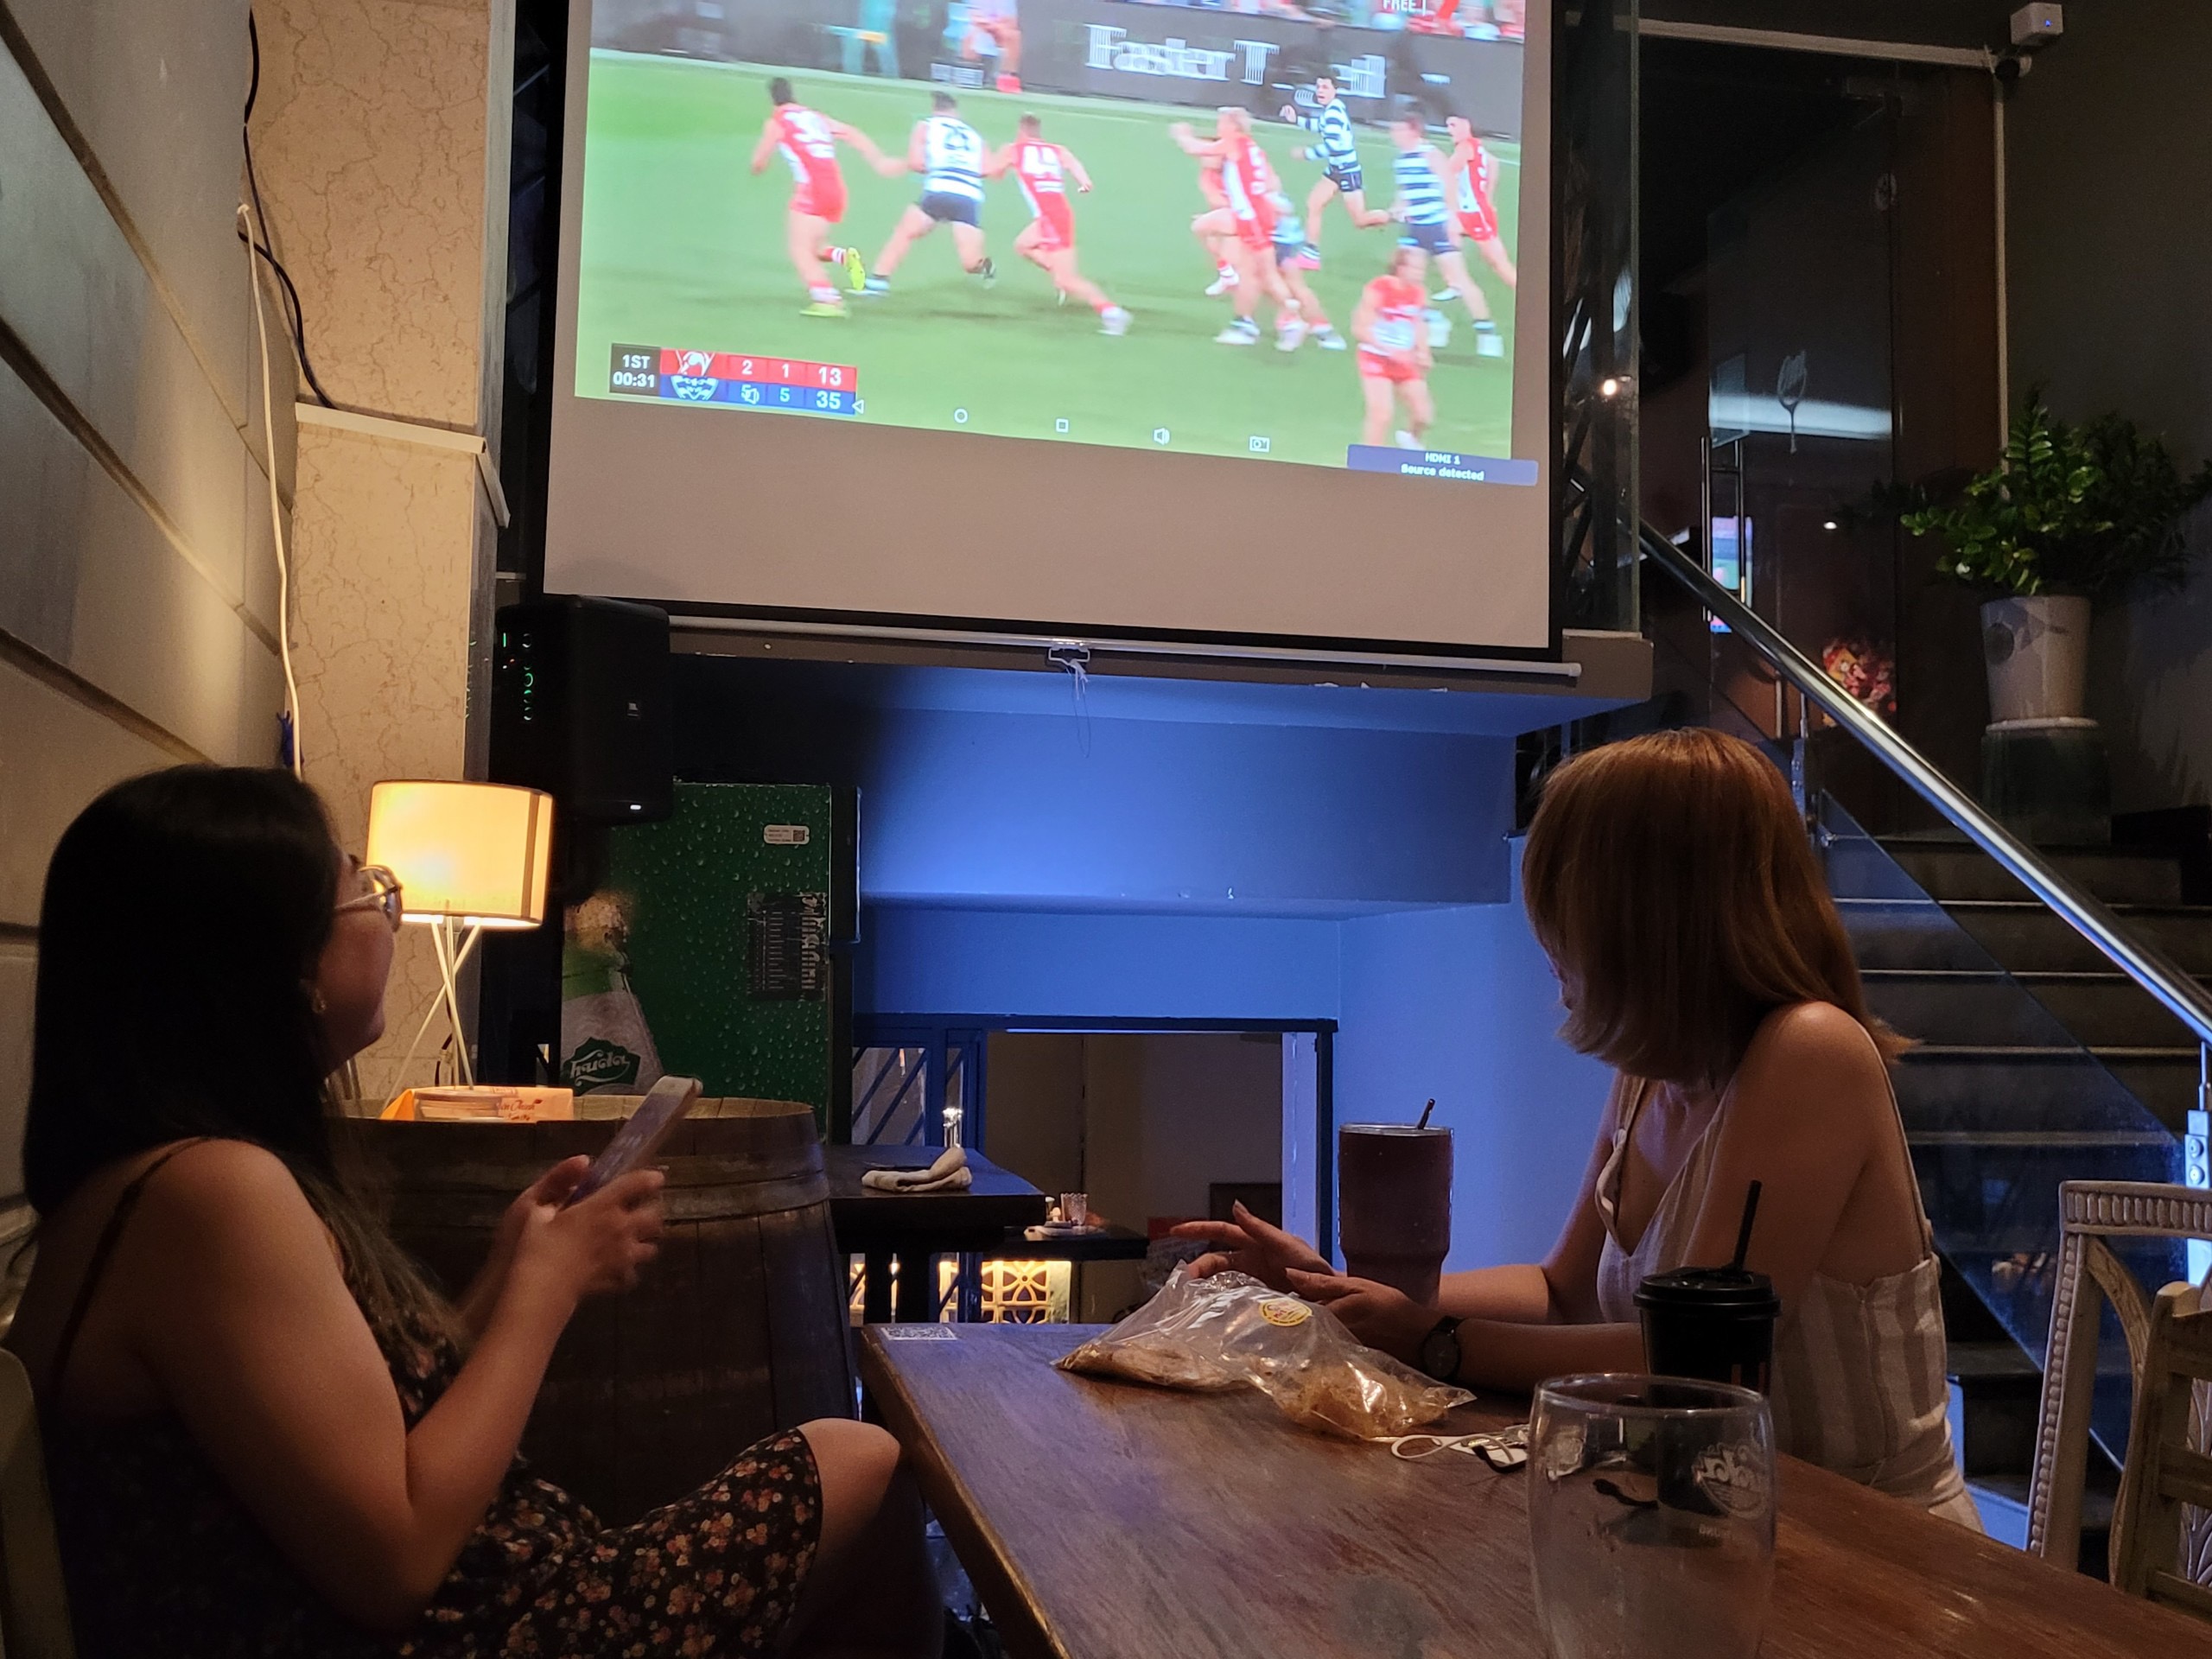 Aussies in Ho Chi Minh City, are you ready for the AFL and NRL on weekend?